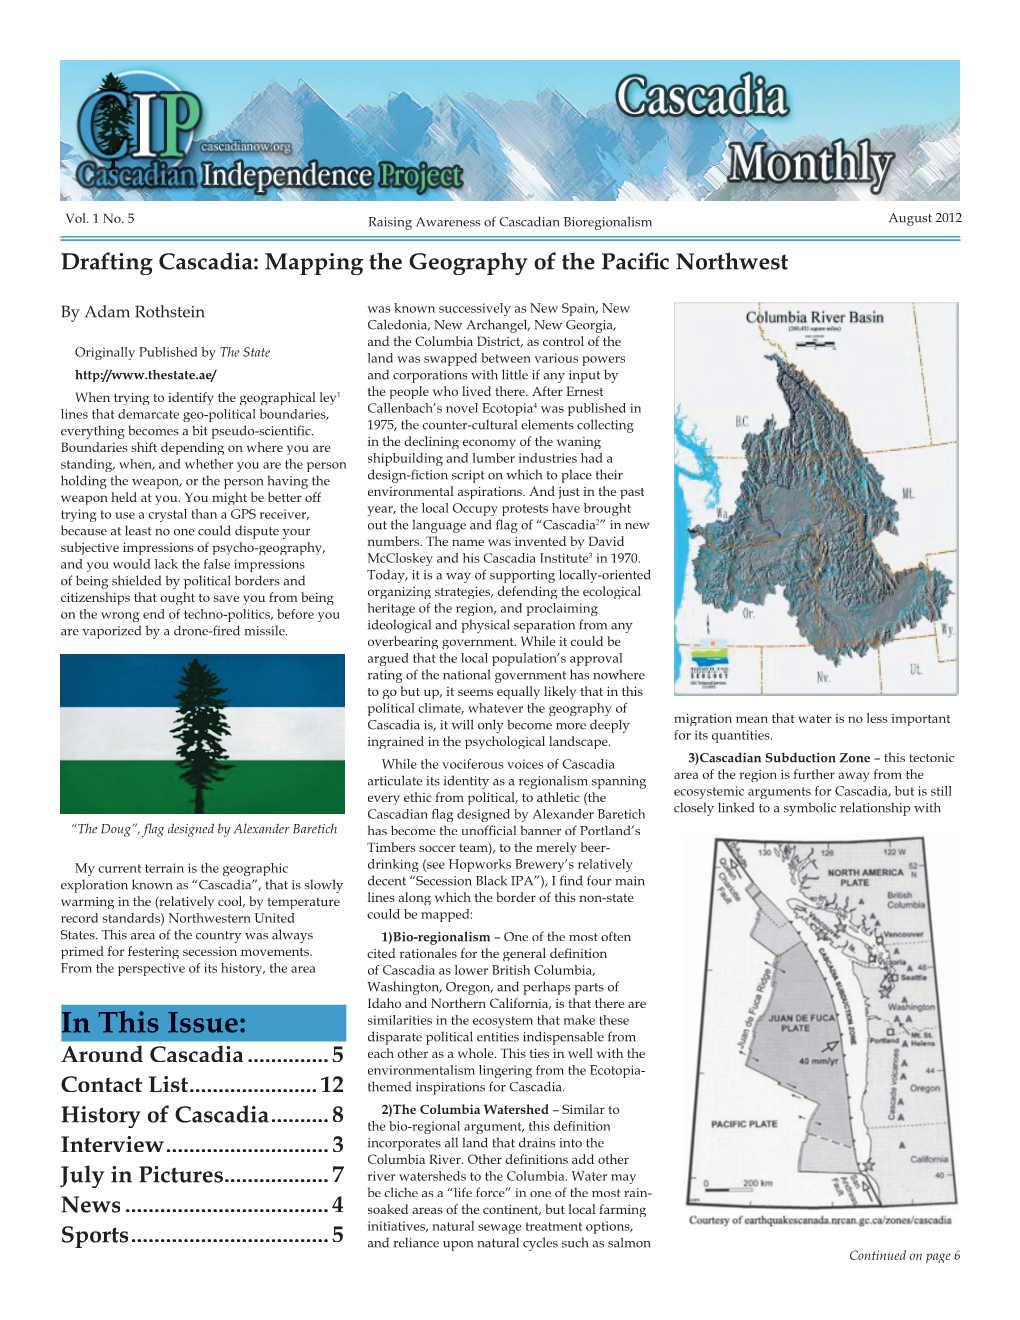 In This Issue: Disparate Political Entities Indispensable from Around Cascadia